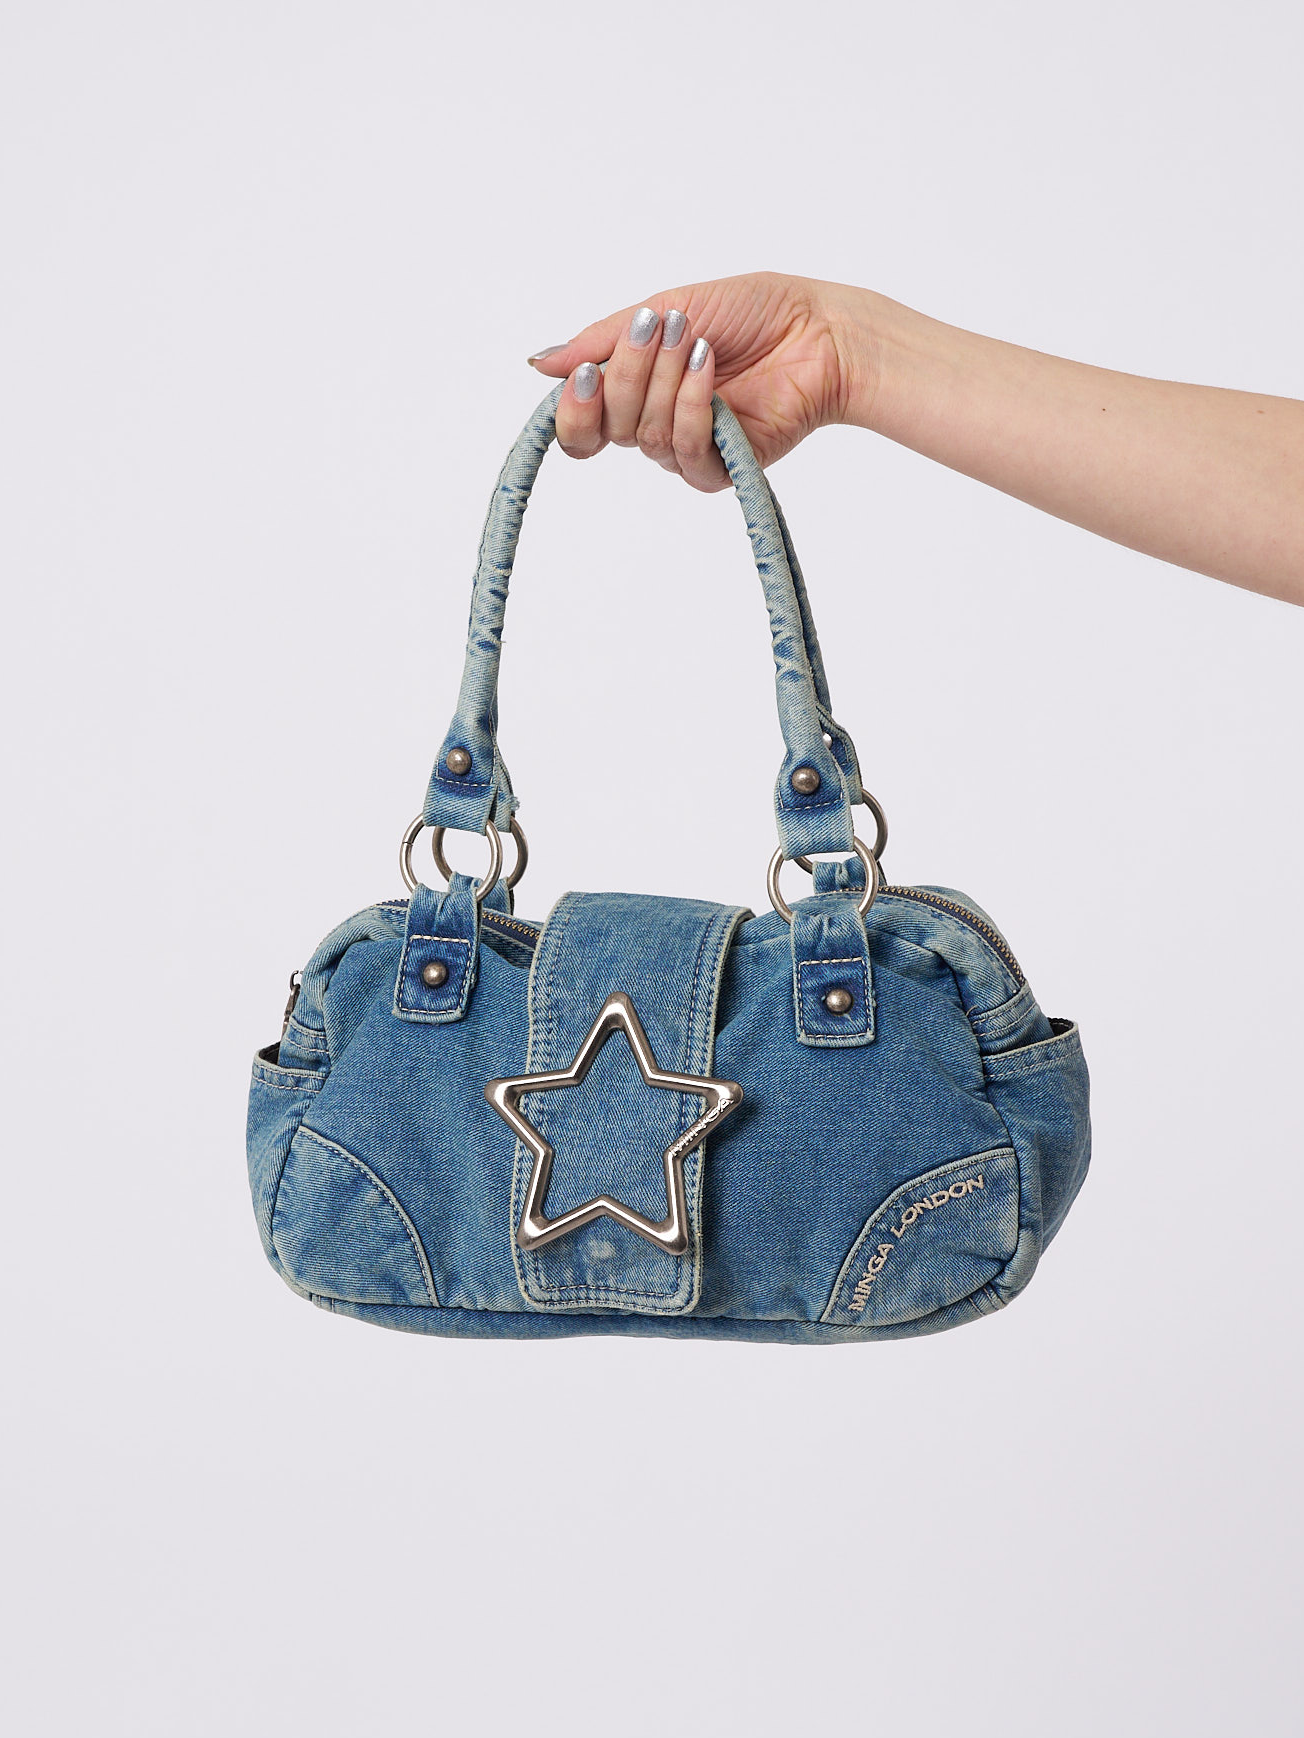 How to Style Denim Bag: The Thing that Can Make You Look Super Youthful